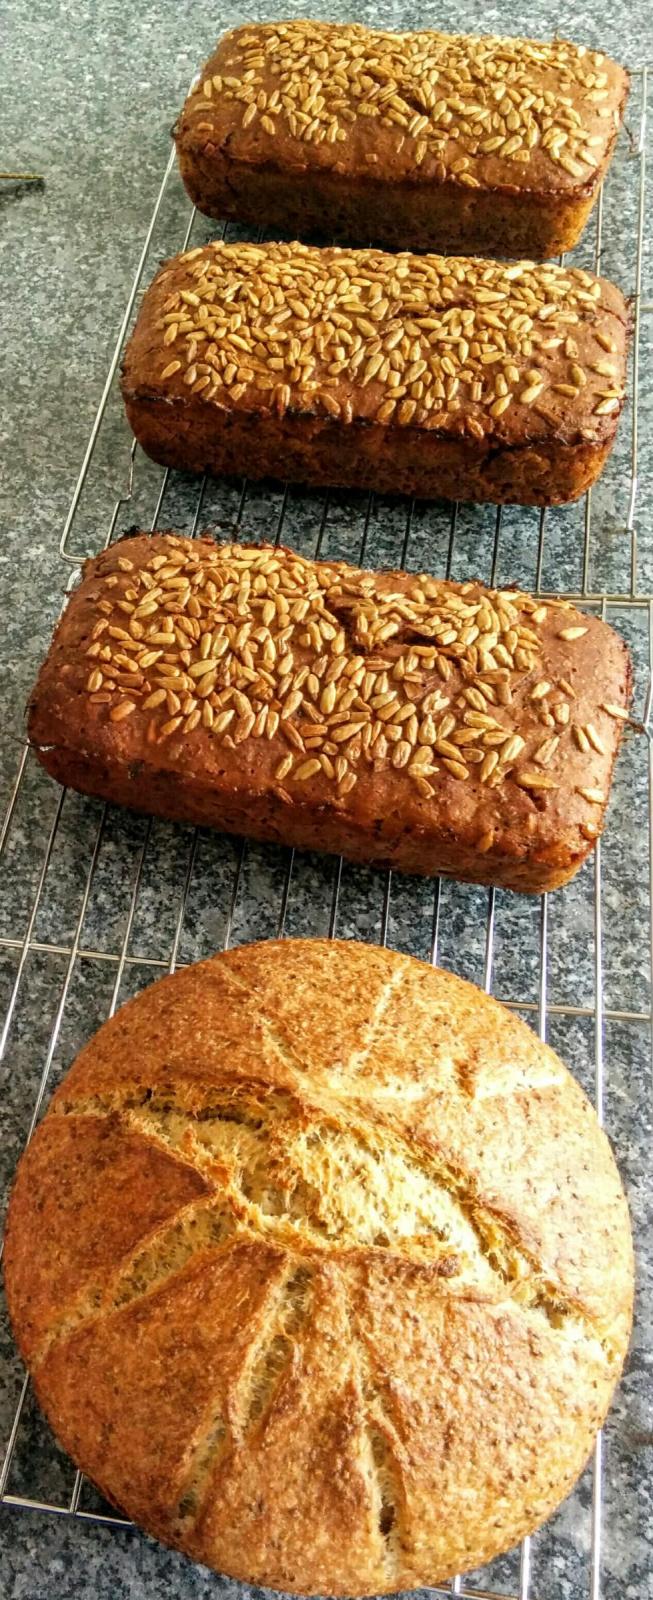 Rye loaves and a wholemeal loaf